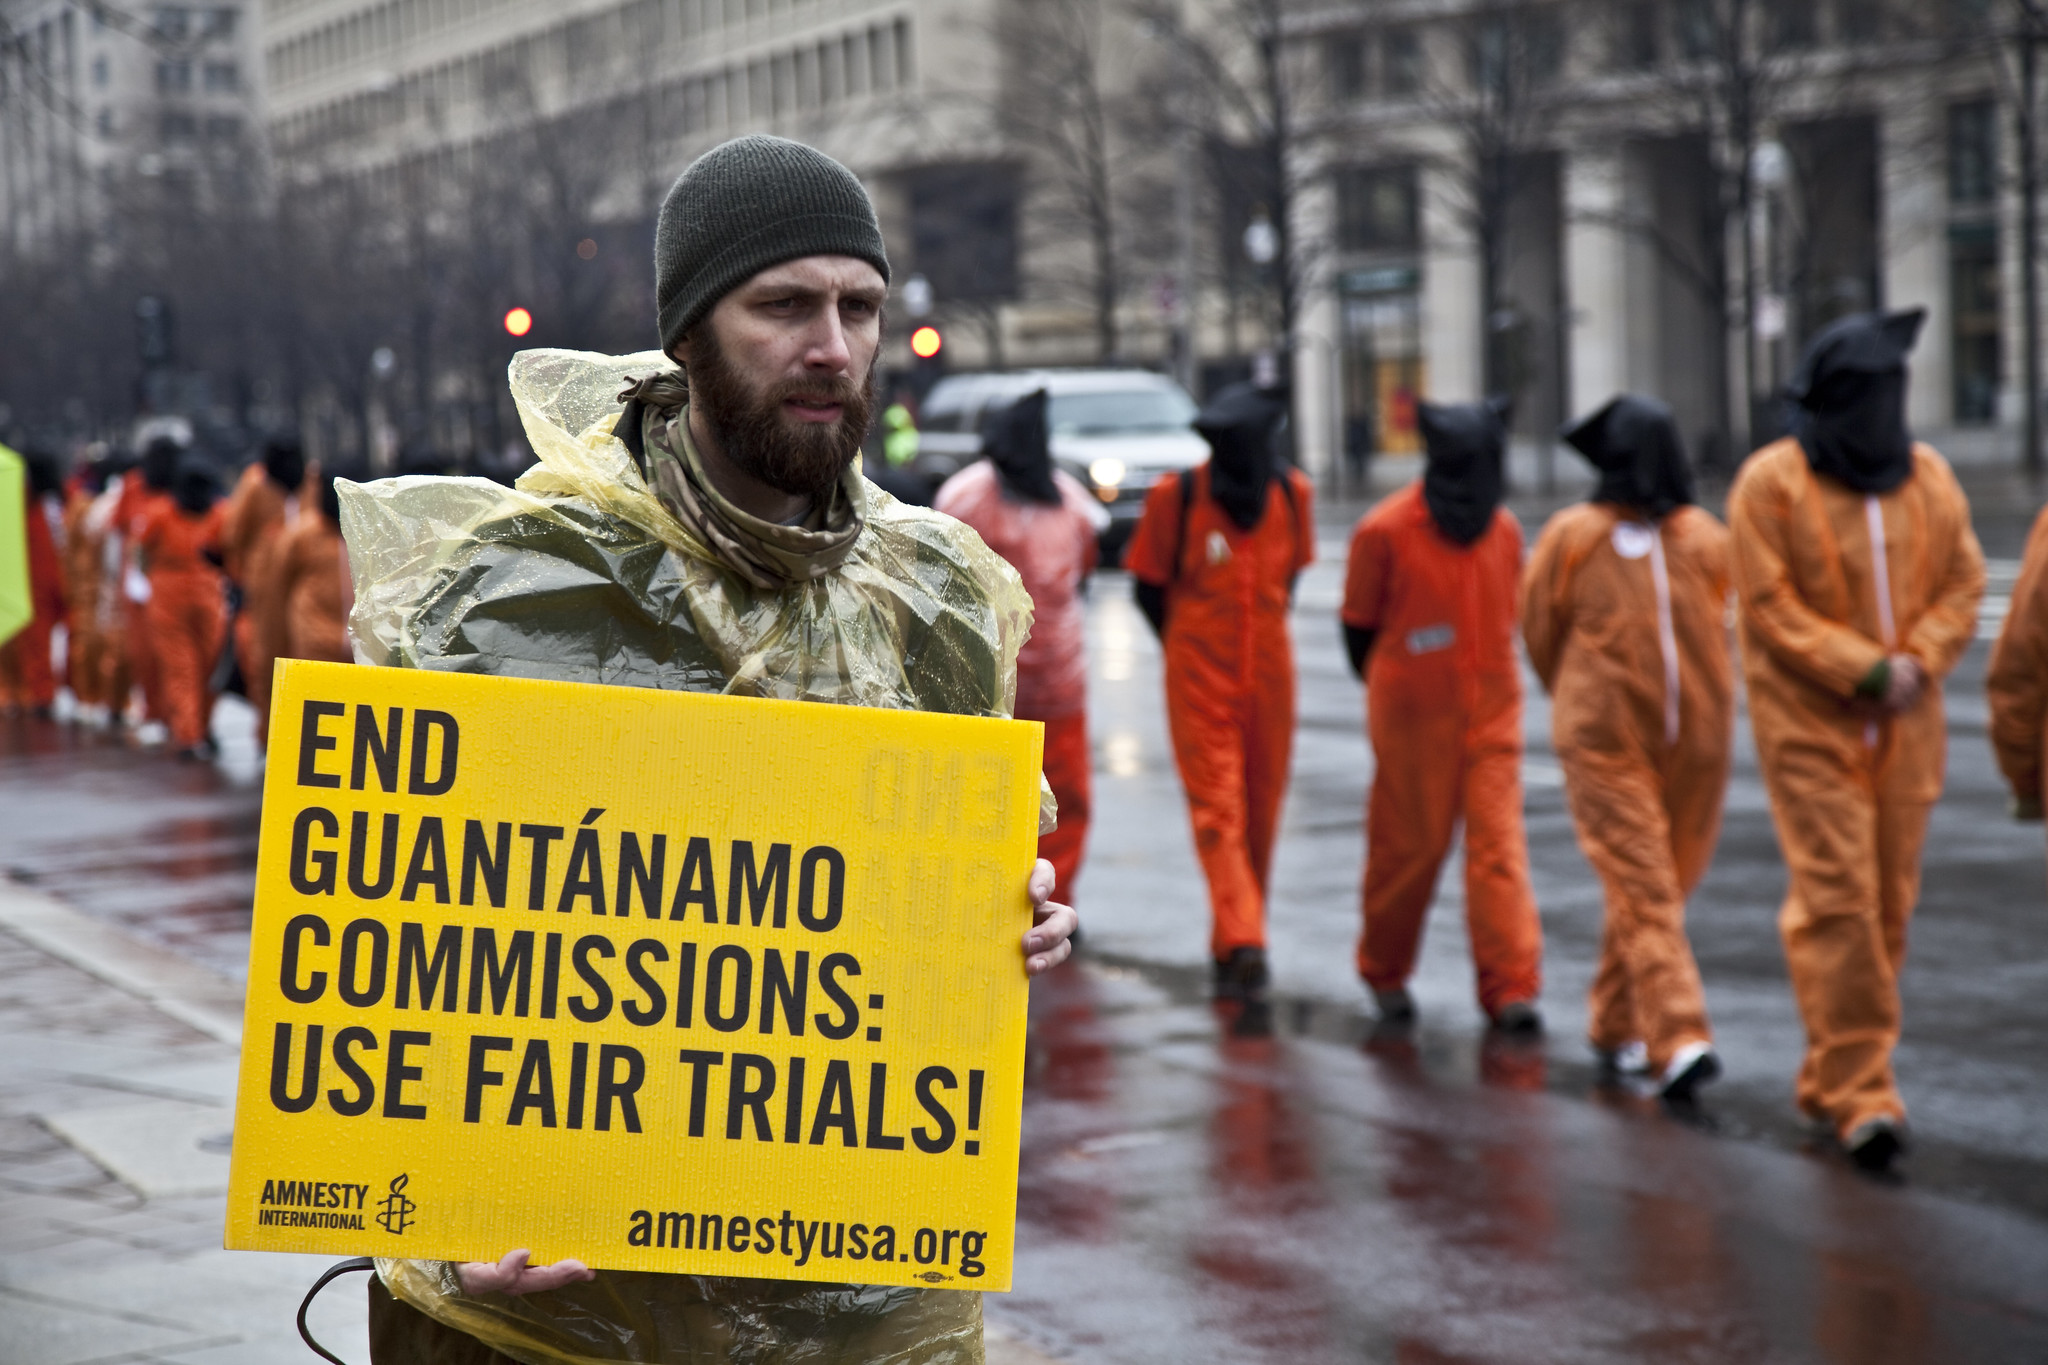 Protesters in Washington calling for the end of the Guantánamo military commissions, January 11, 2021. Photo: Justin Norman/Flickr